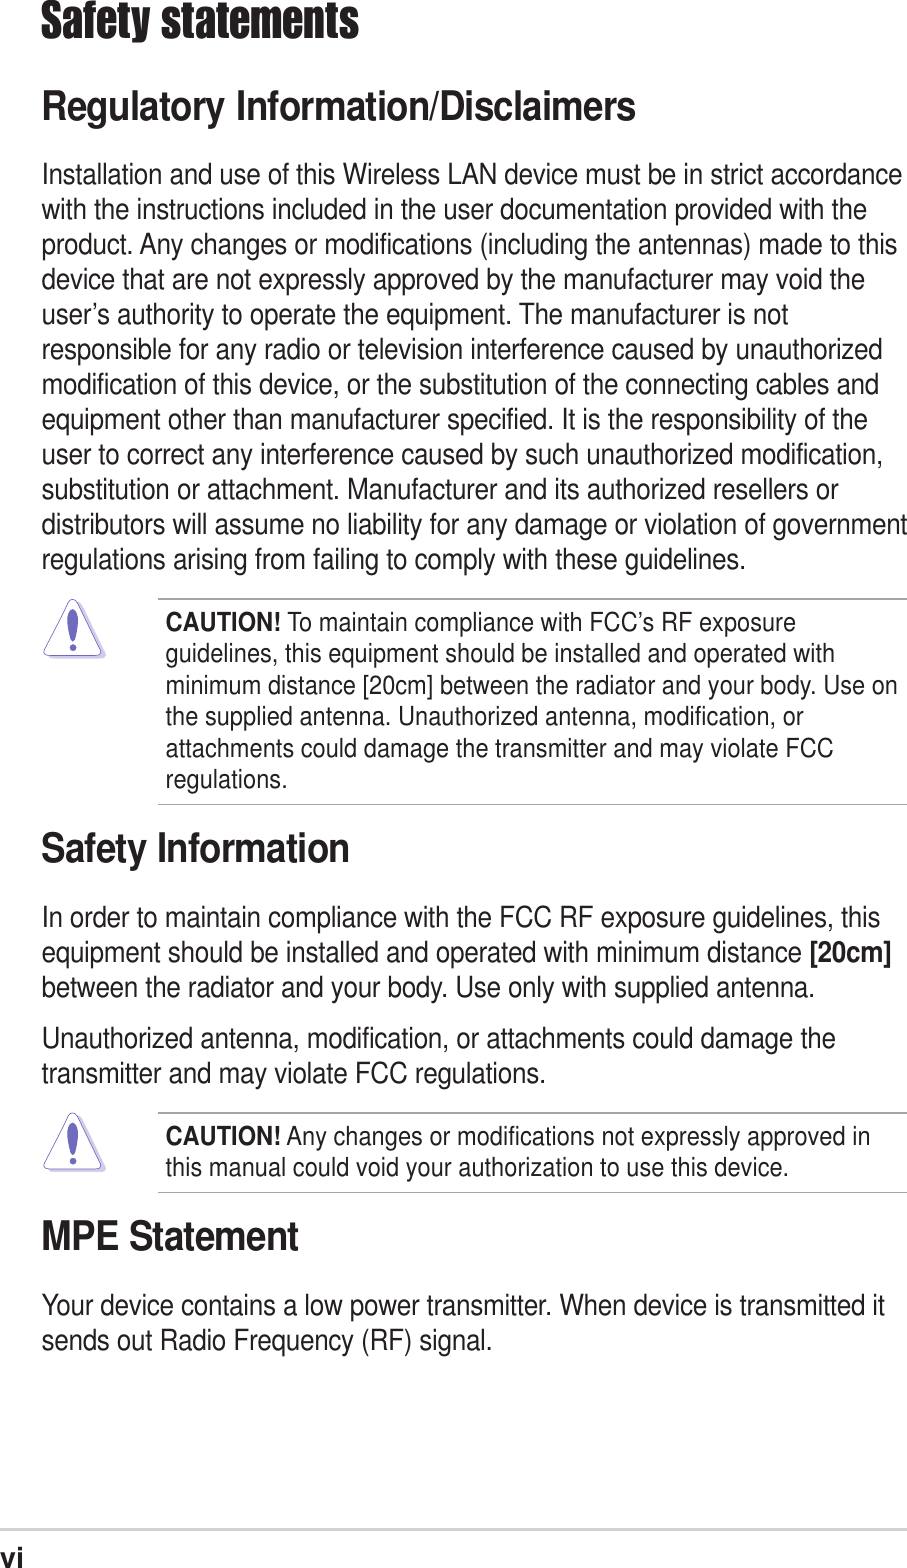 viSafety statementsRegulatory Information/DisclaimersInstallation and use of this Wireless LAN device must be in strict accordancewith the instructions included in the user documentation provided with theproduct. Any changes or modifications (including the antennas) made to thisdevice that are not expressly approved by the manufacturer may void theuser’s authority to operate the equipment. The manufacturer is notresponsible for any radio or television interference caused by unauthorizedmodification of this device, or the substitution of the connecting cables andequipment other than manufacturer specified. It is the responsibility of theuser to correct any interference caused by such unauthorized modification,substitution or attachment. Manufacturer and its authorized resellers ordistributors will assume no liability for any damage or violation of governmentregulations arising from failing to comply with these guidelines.CAUTION! To maintain compliance with FCC’s RF exposureguidelines, this equipment should be installed and operated withminimum distance [20cm] between the radiator and your body. Use onthe supplied antenna. Unauthorized antenna, modification, orattachments could damage the transmitter and may violate FCCregulations.Safety InformationIn order to maintain compliance with the FCC RF exposure guidelines, thisequipment should be installed and operated with minimum distance [20cm]between the radiator and your body. Use only with supplied antenna.Unauthorized antenna, modification, or attachments could damage thetransmitter and may violate FCC regulations.CAUTION! Any changes or modifications not expressly approved inthis manual could void your authorization to use this device.MPE StatementYour device contains a low power transmitter. When device is transmitted itsends out Radio Frequency (RF) signal.